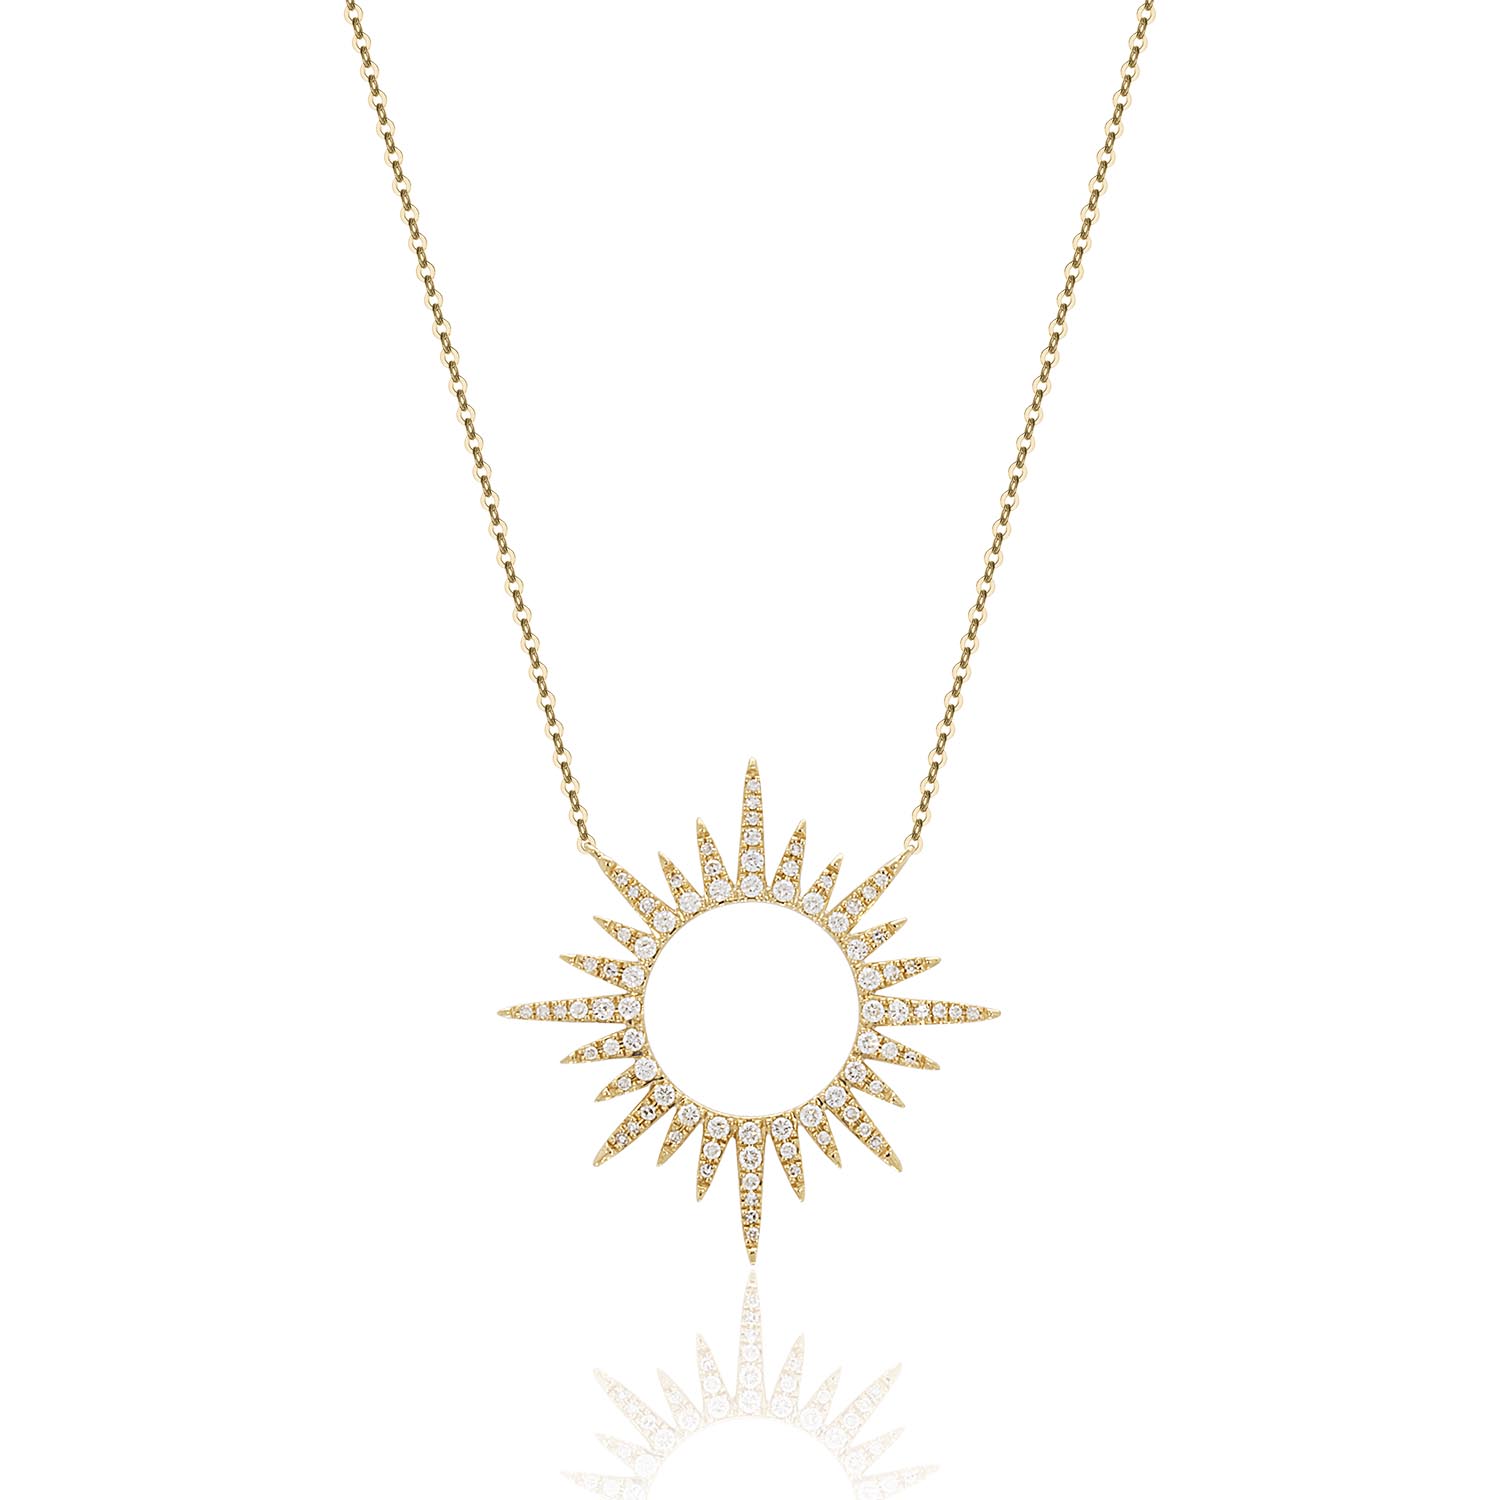 14K Yellow Gold Sun Pendant on an Adjustable 14K Yellow Gold Chain Necklace 